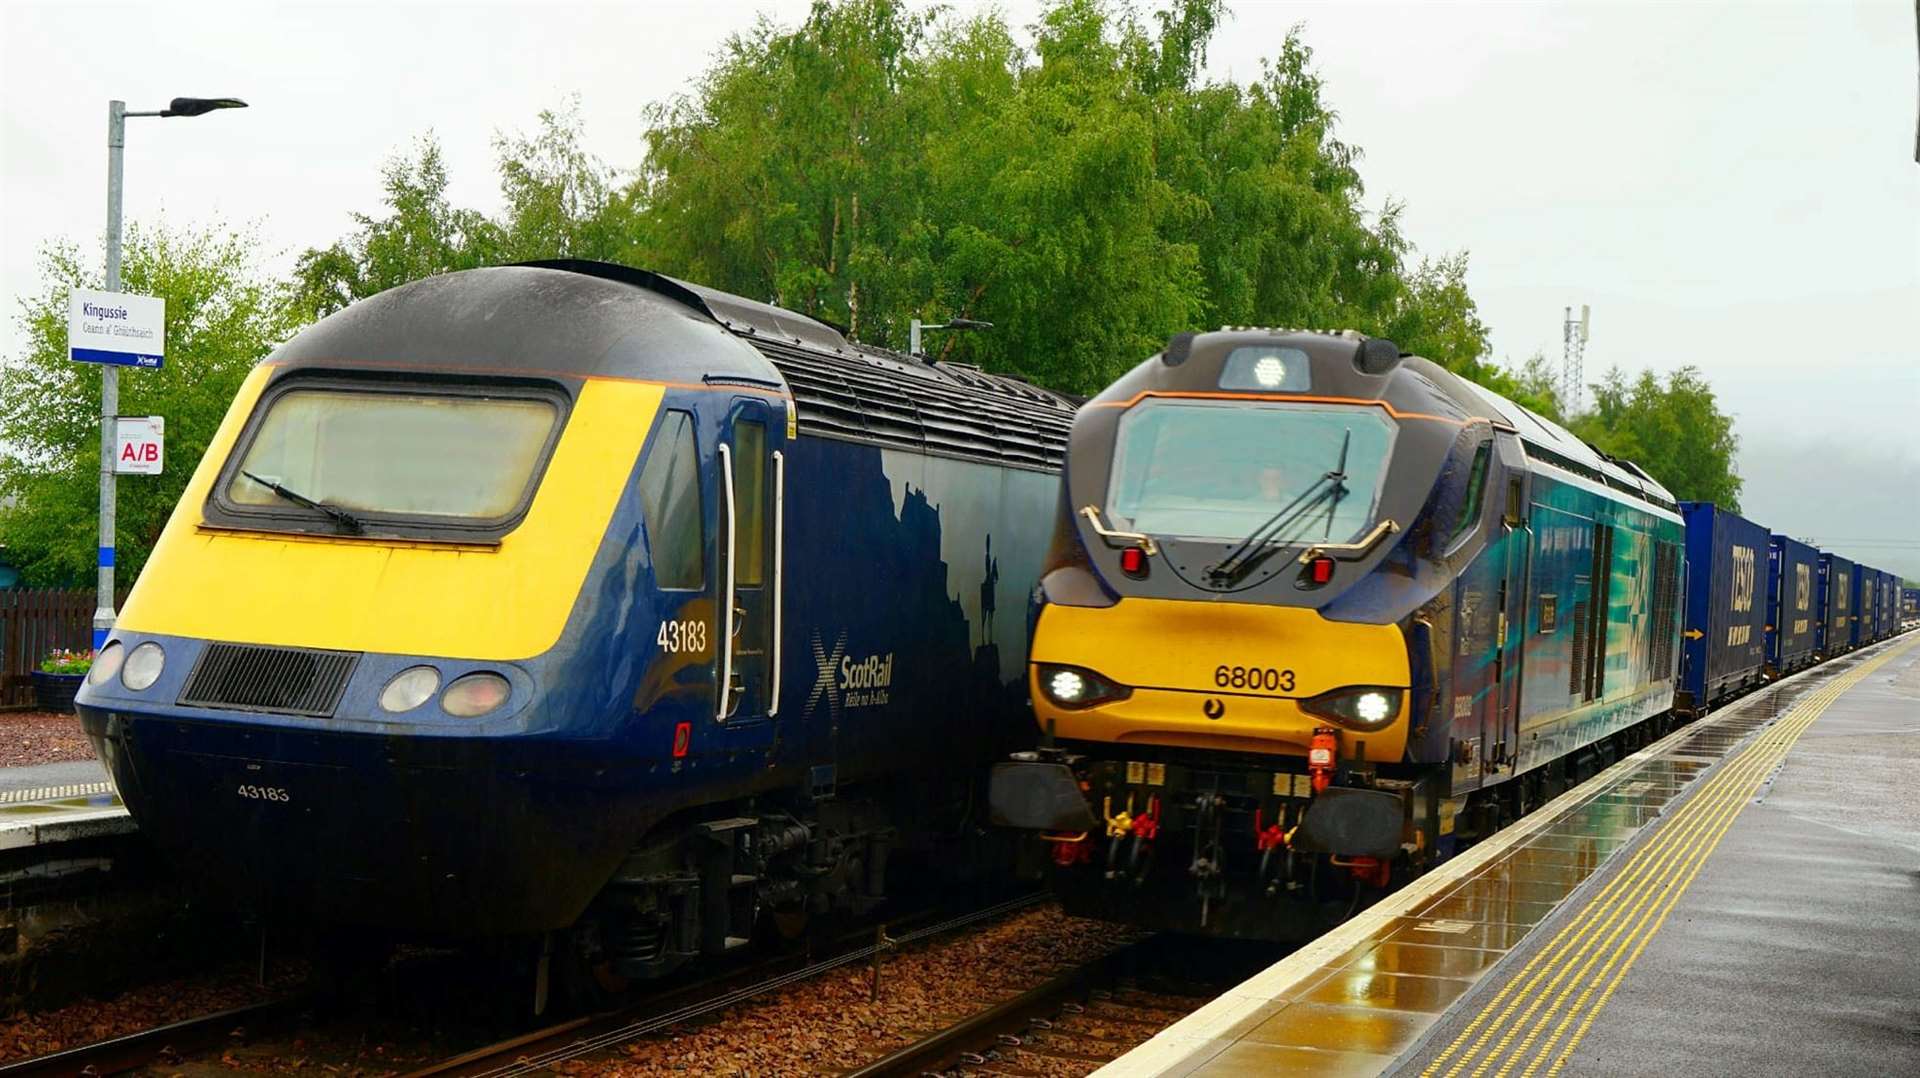 ScotRail customers across parts of Scotland are expected to experience longer journey times as a result of the extreme weather brought by Storm Ciaran.